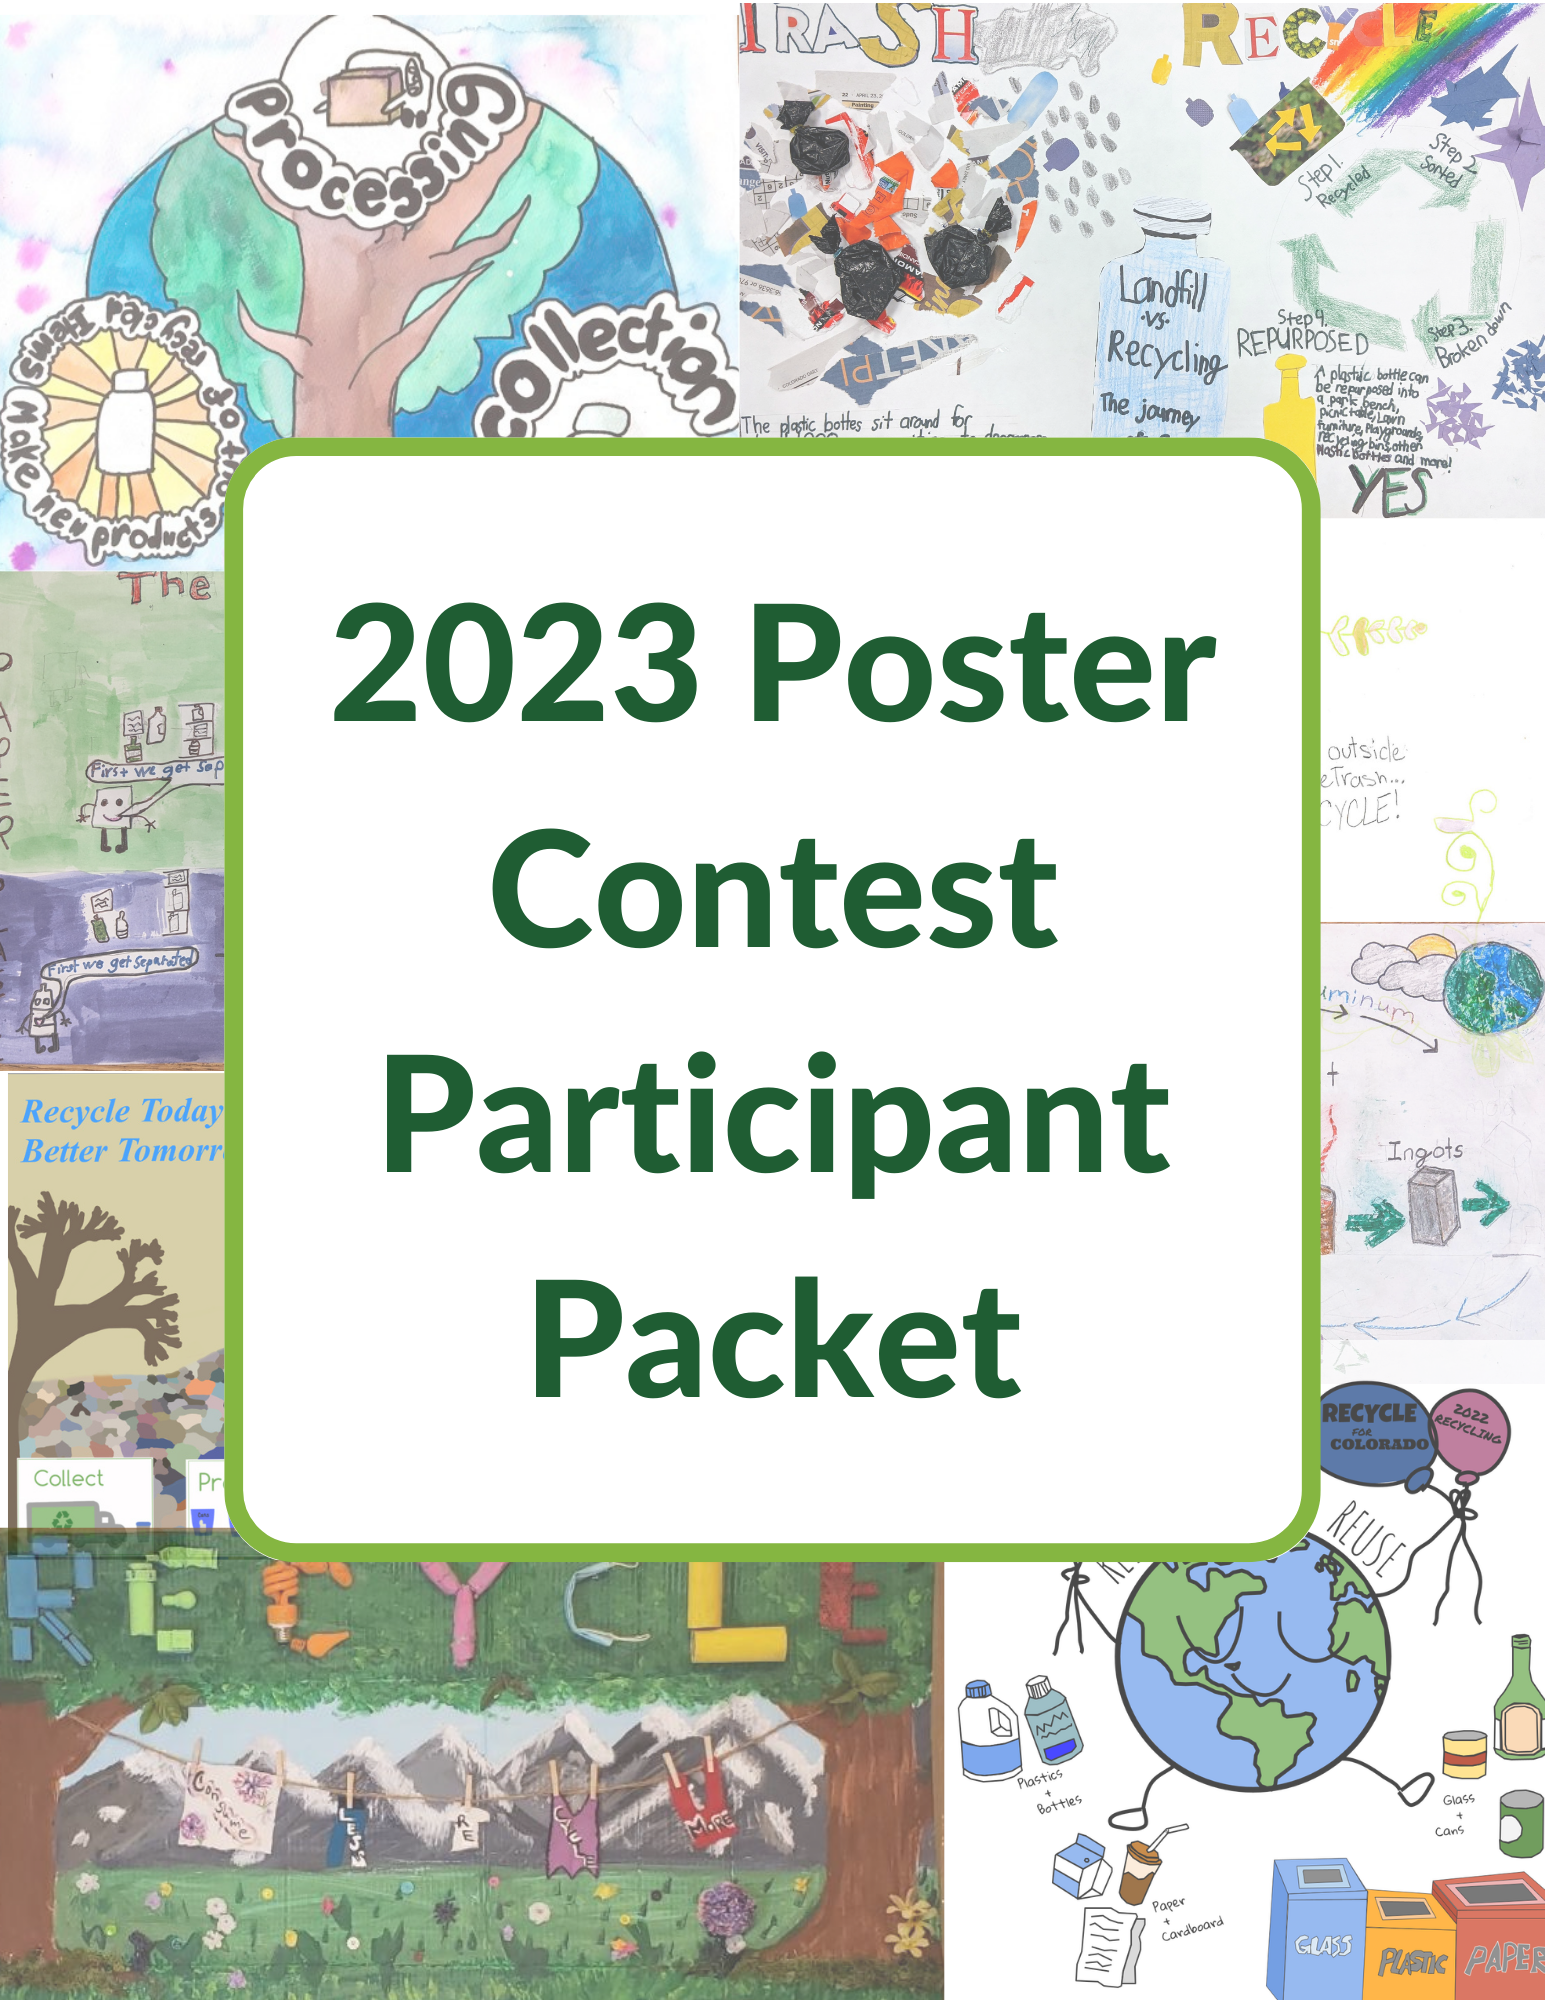 2023 Poster Contest Participant Packet